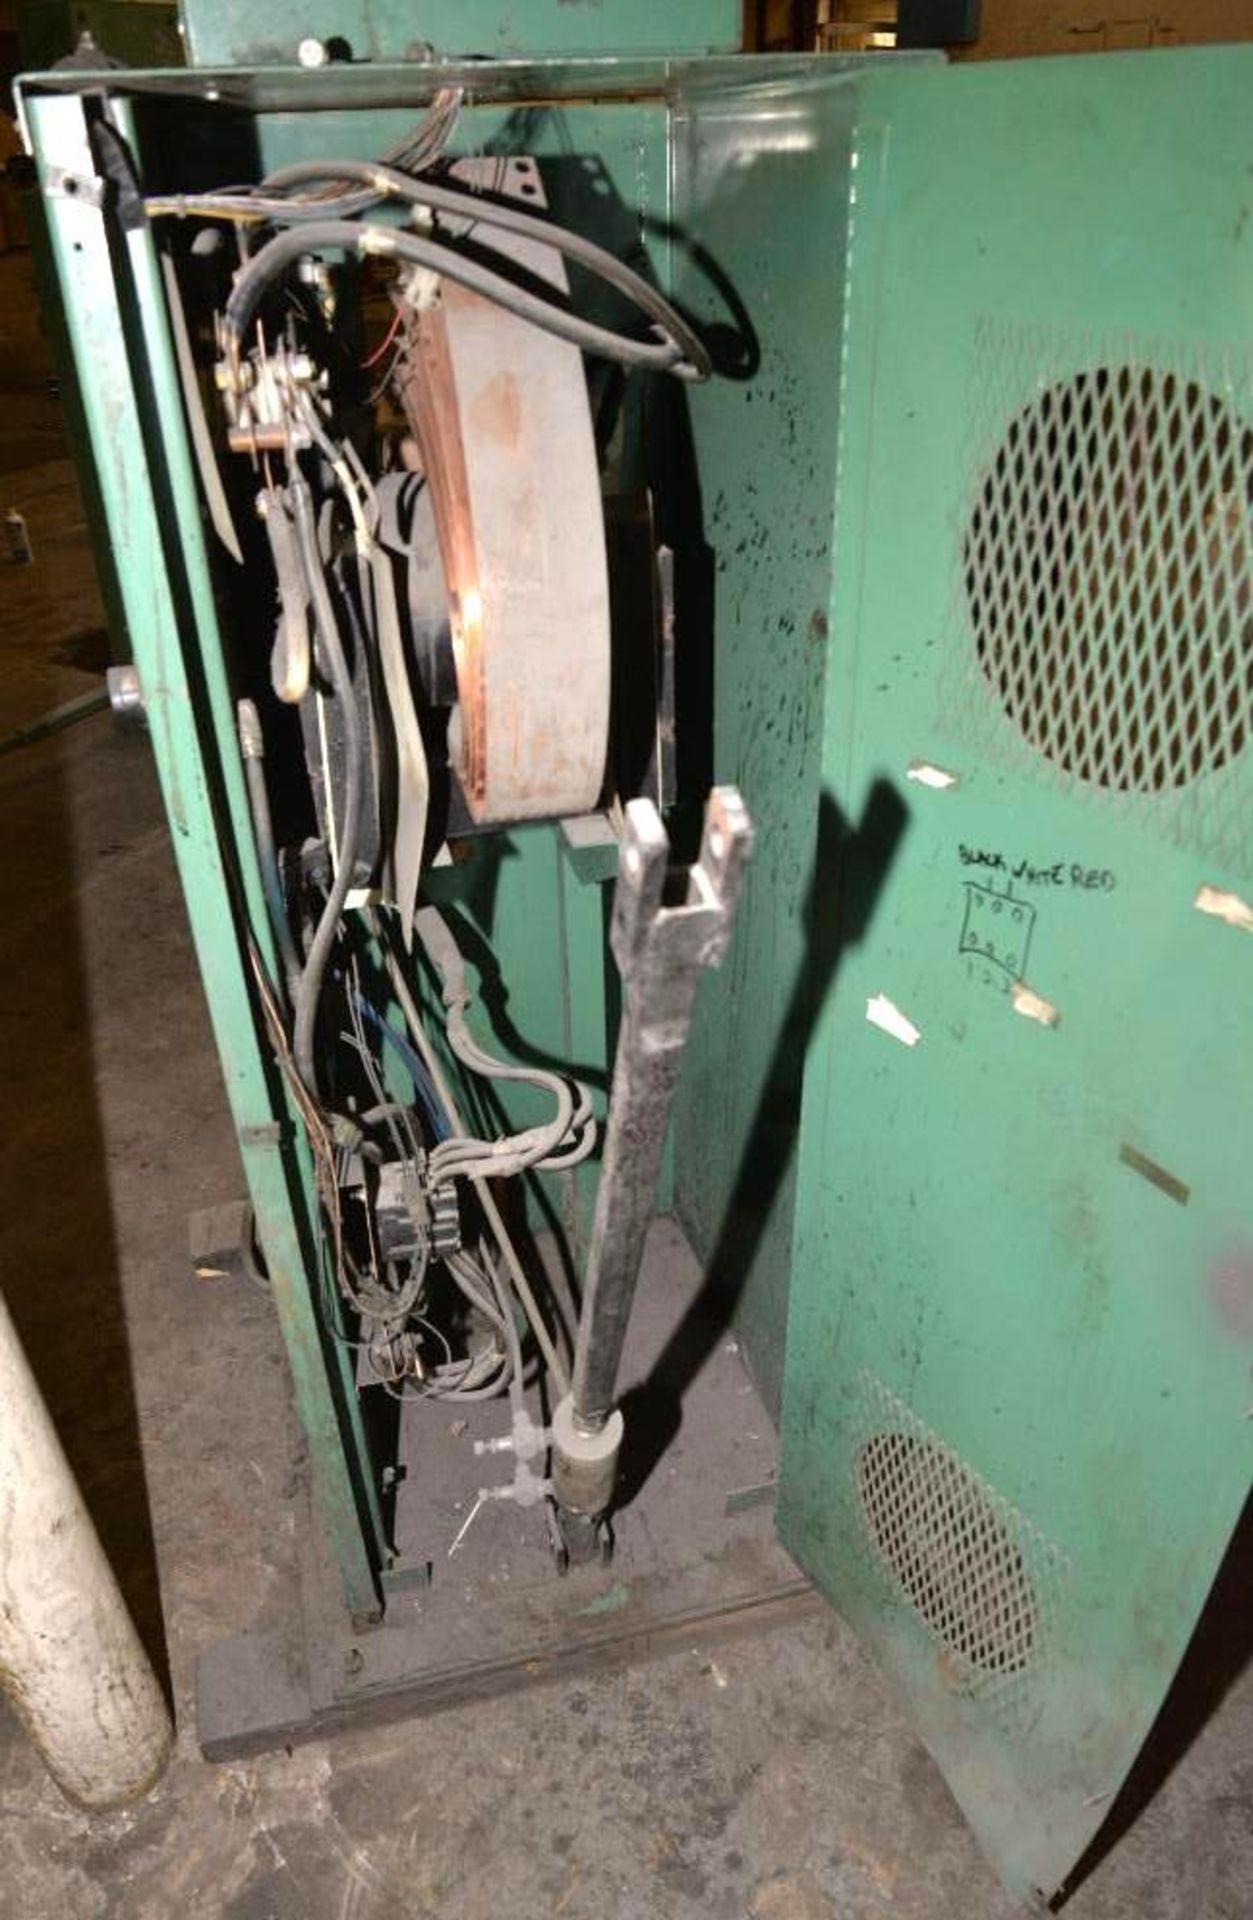 WESTERN ARCTRONICS SPOT WELDER - MD. 30KVA 60 CYCLES - SINGLE PHASE- S/N: FJ 216 - PRIMARY 230V. 100 - Image 5 of 5